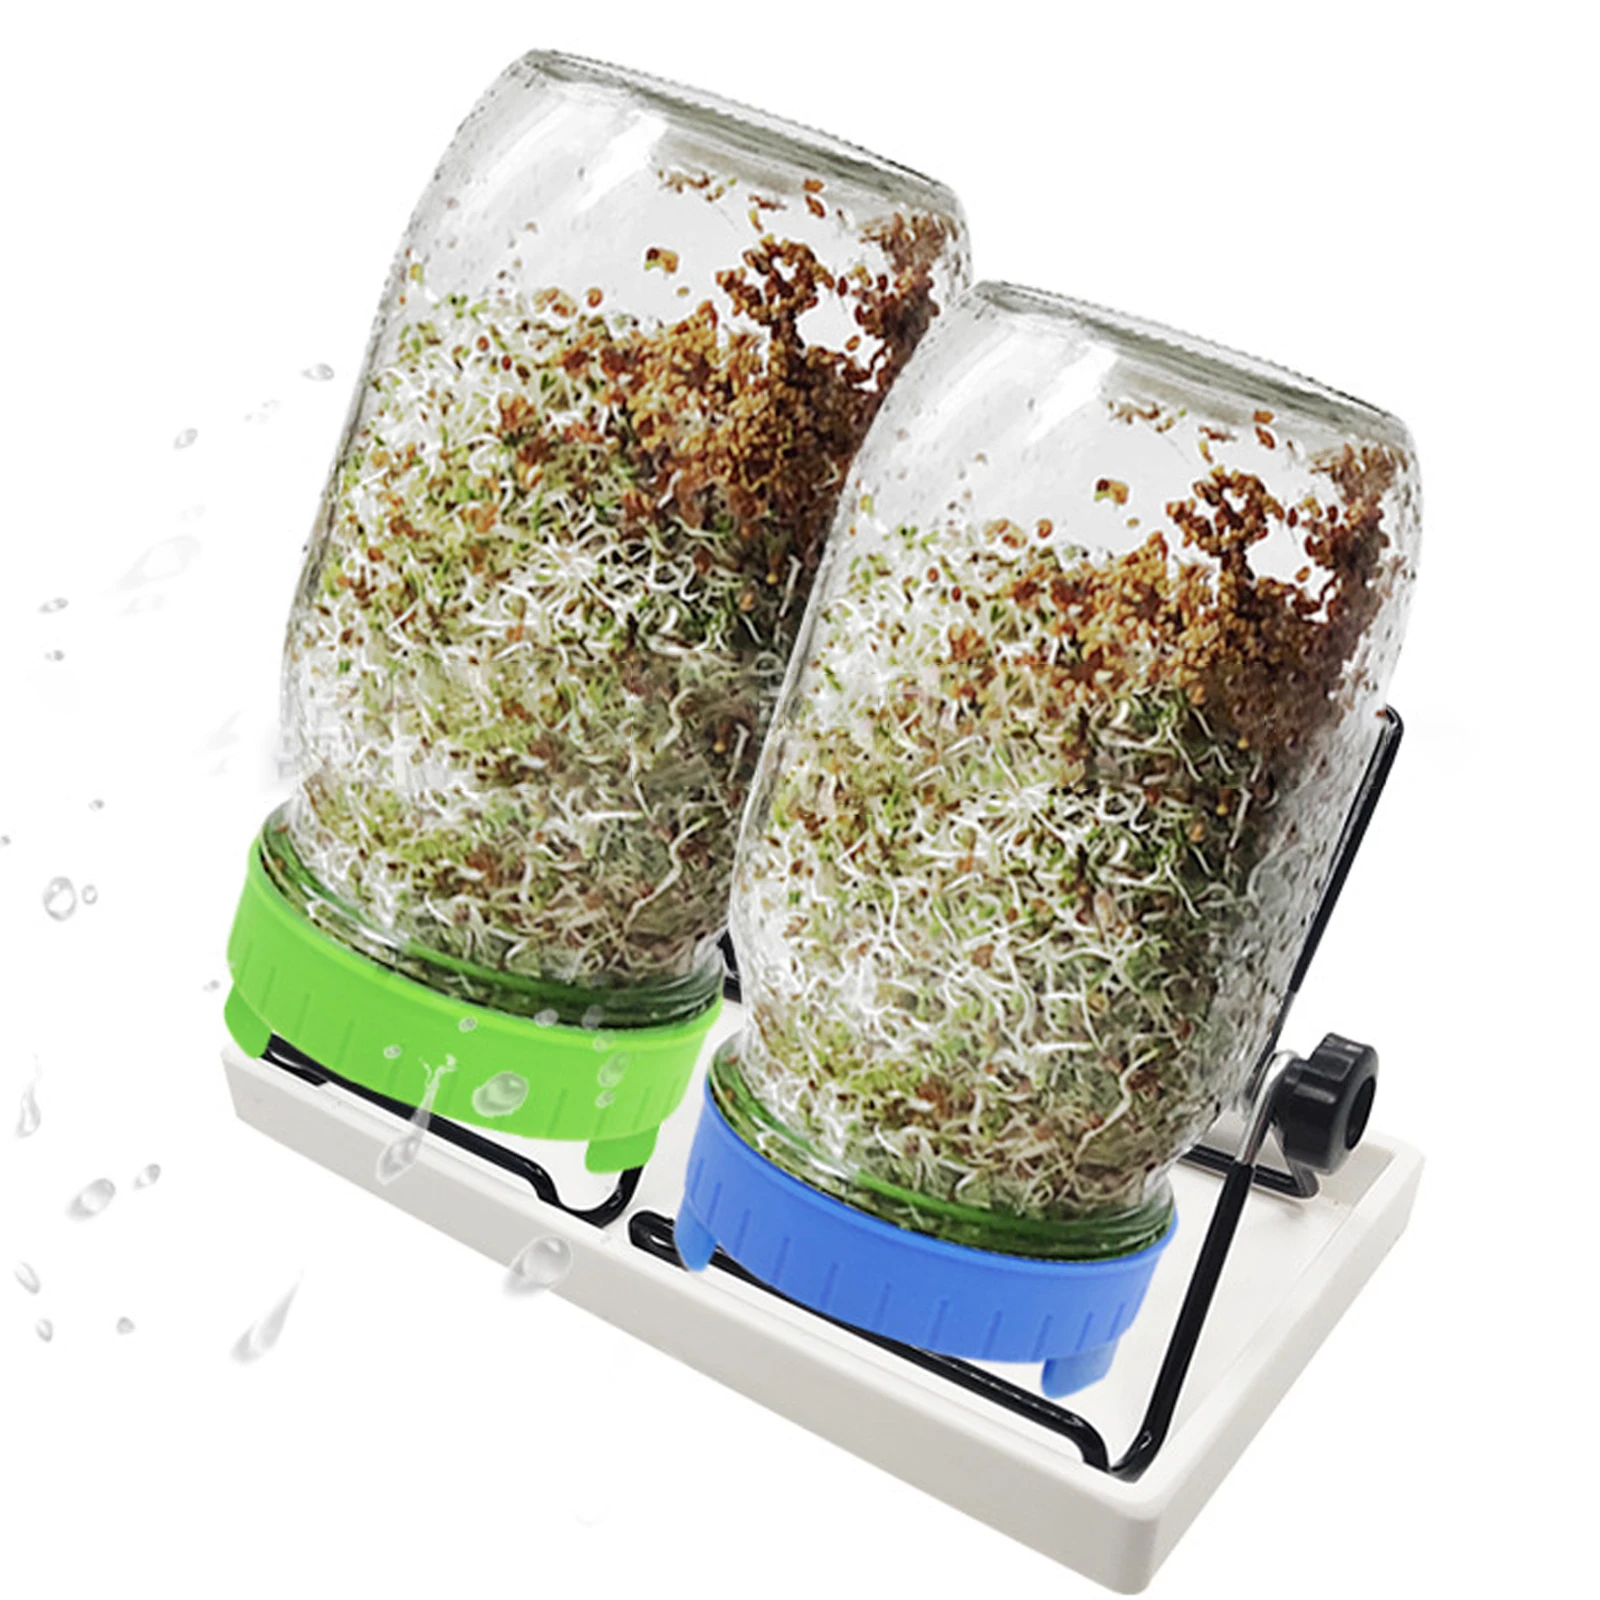 

Sprouting Lids With Stainless Steel Screen For Wide Mouth Mason Jars Germination Kit Sprout Maker Seedling Tray For Bean Sprouts